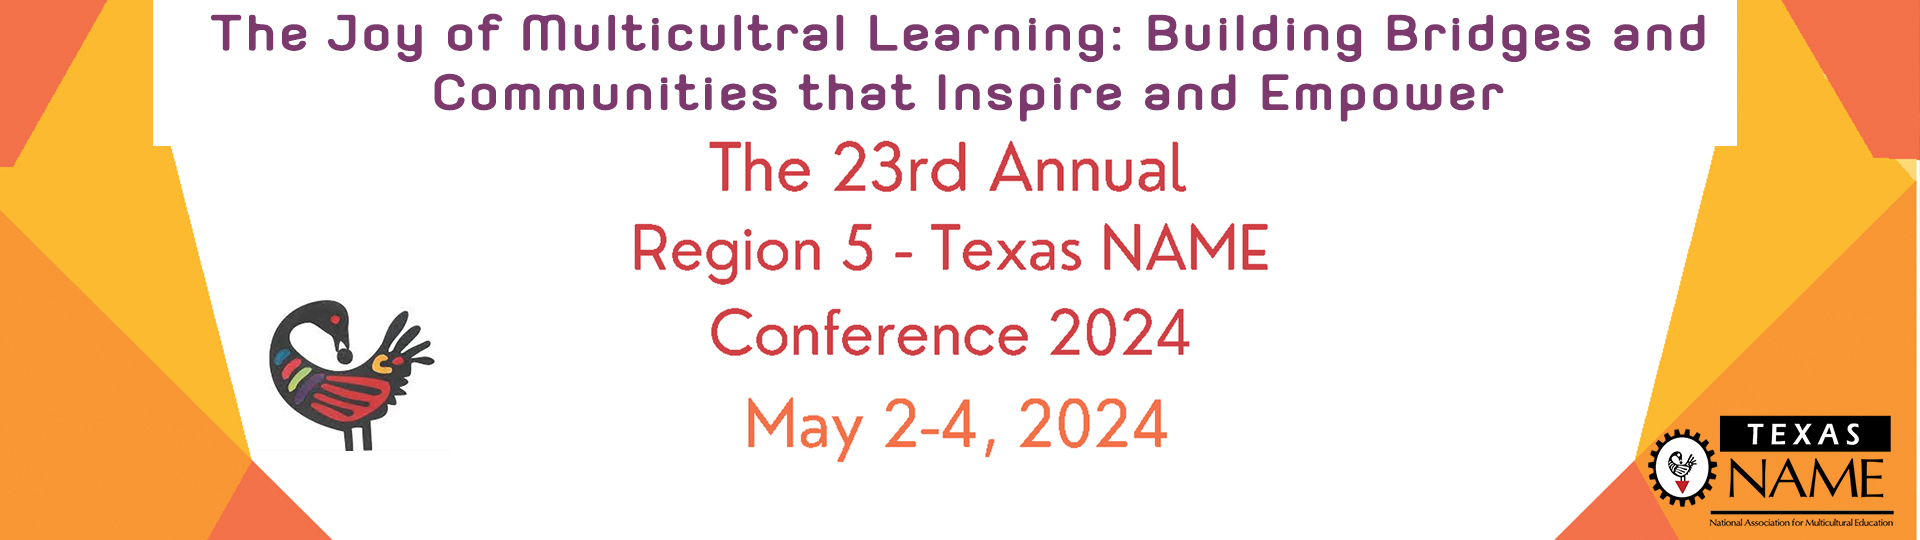 The 24th Annual 2024 Region 5-Texas NAME Conference